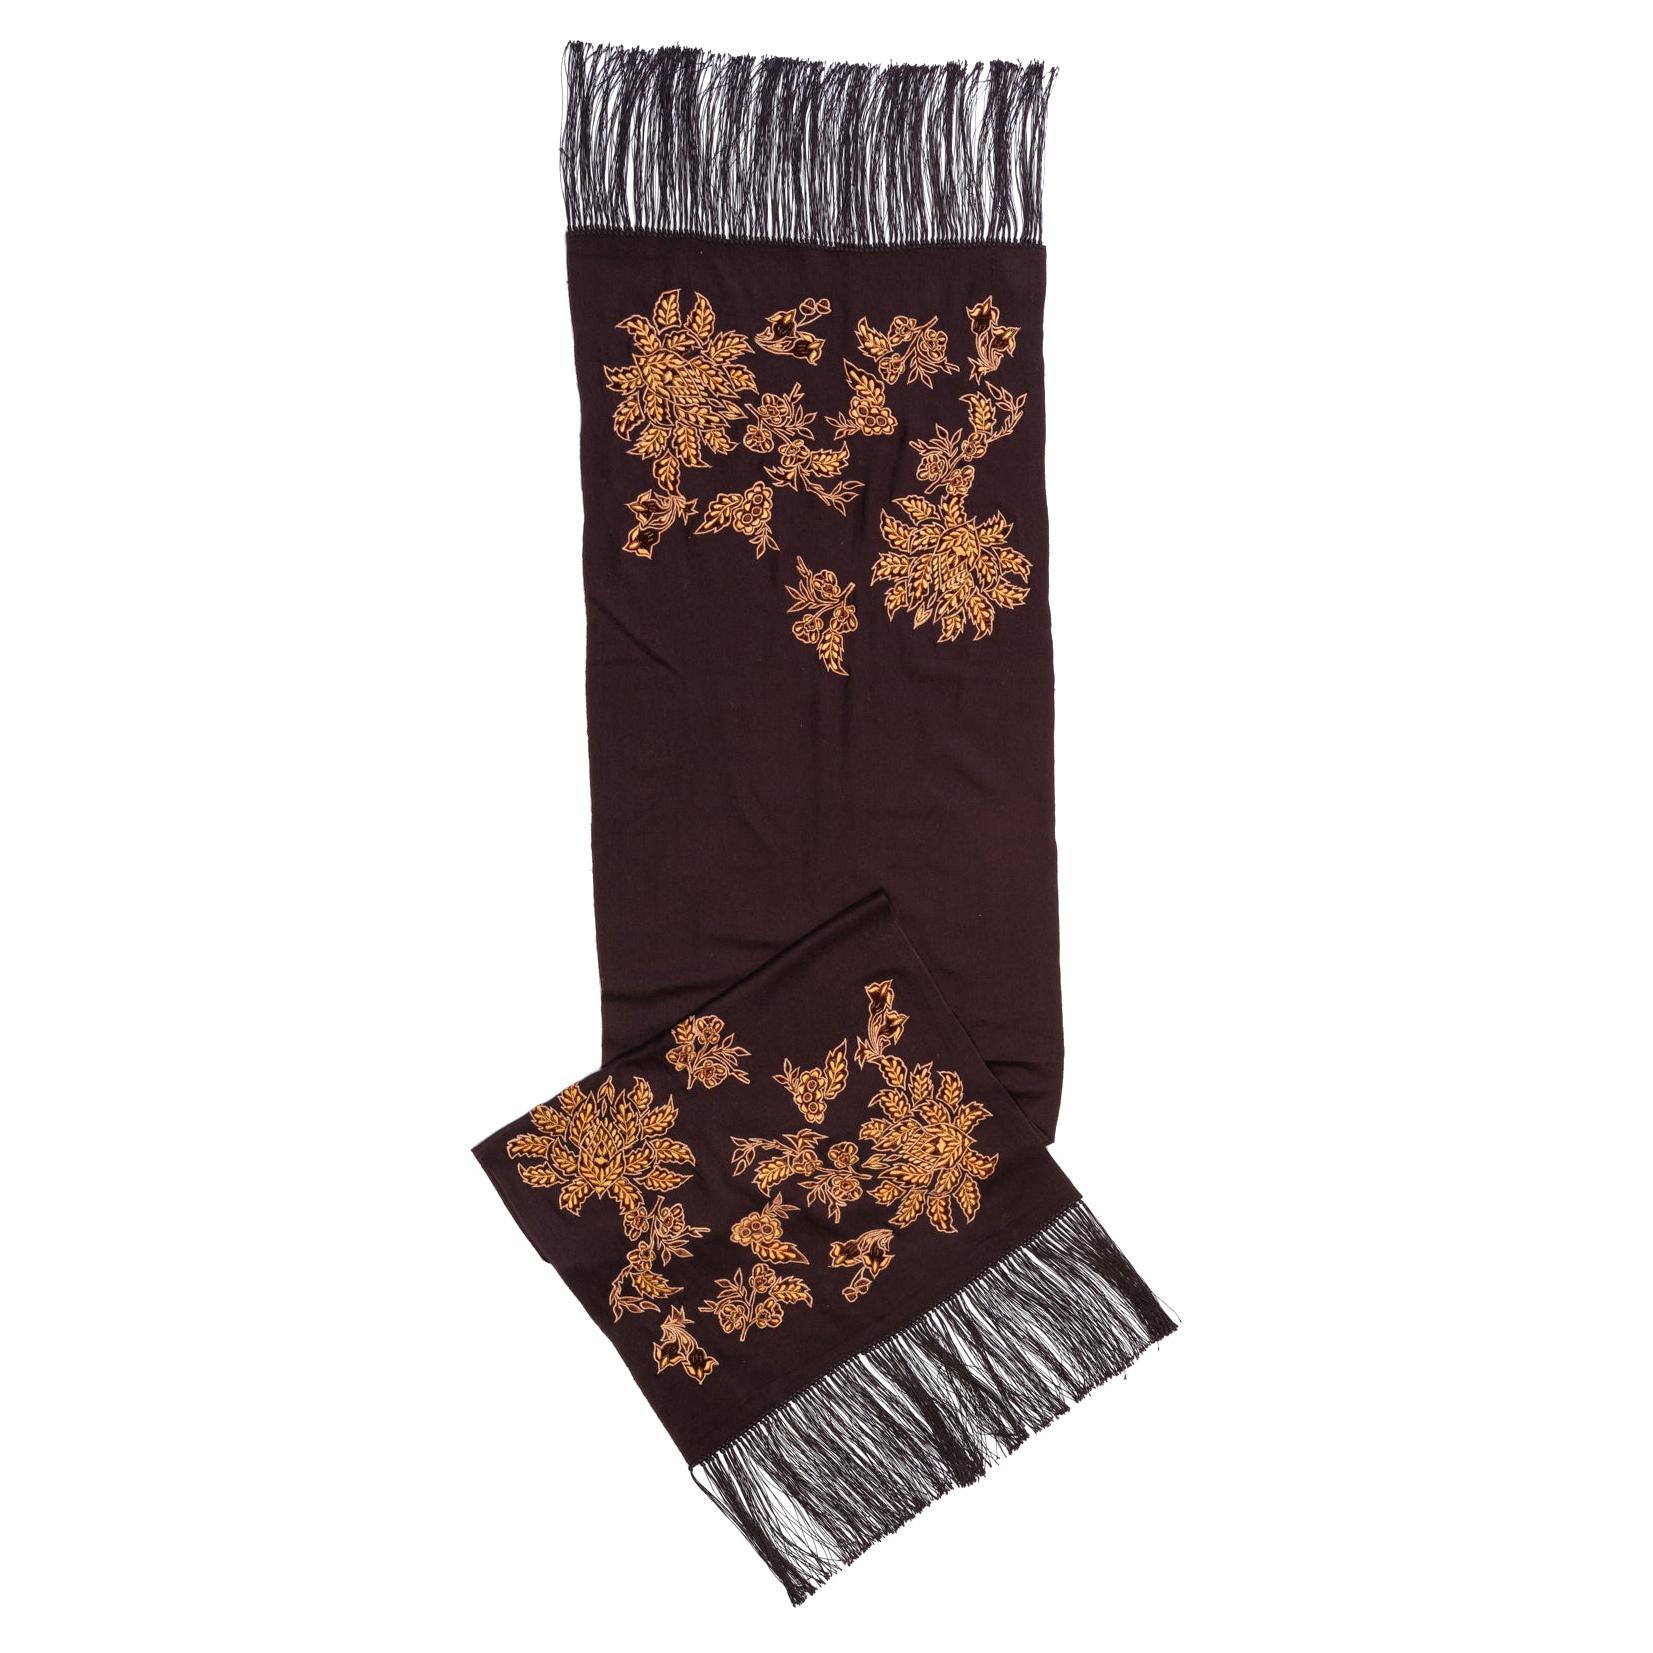 Burberry Embroidered Cashmere Brown Stole